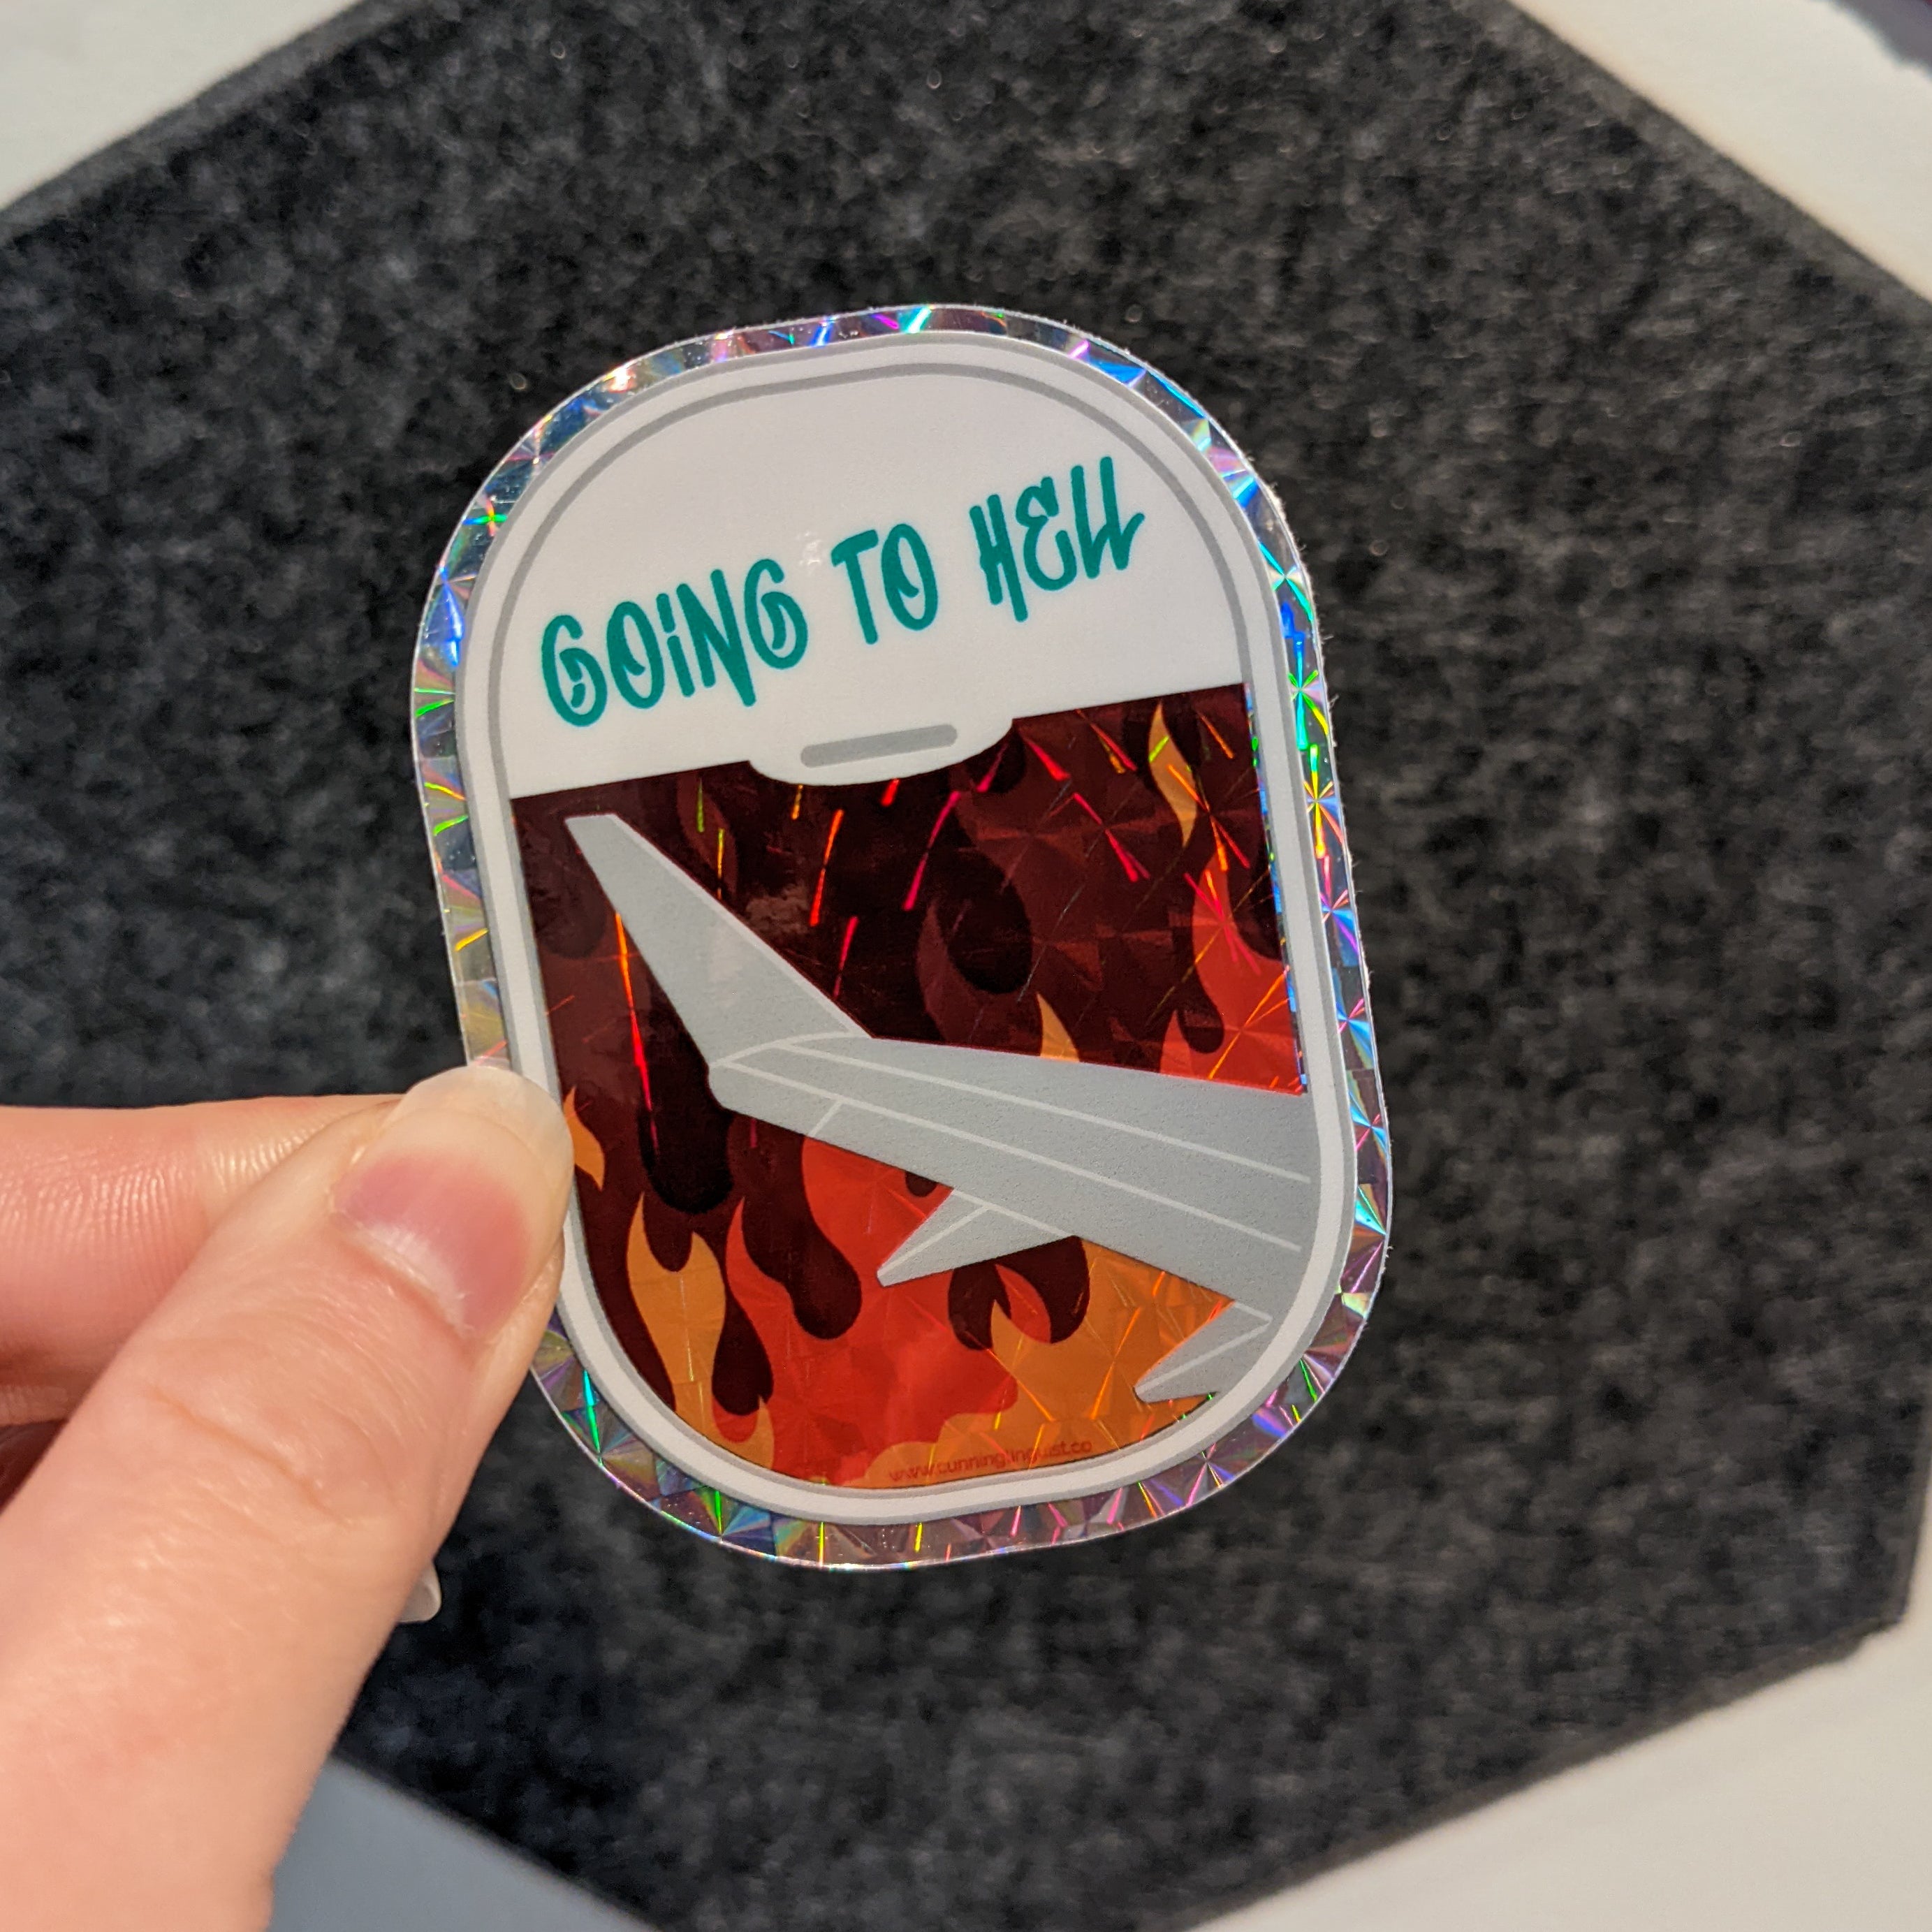 Going to Hell sticker